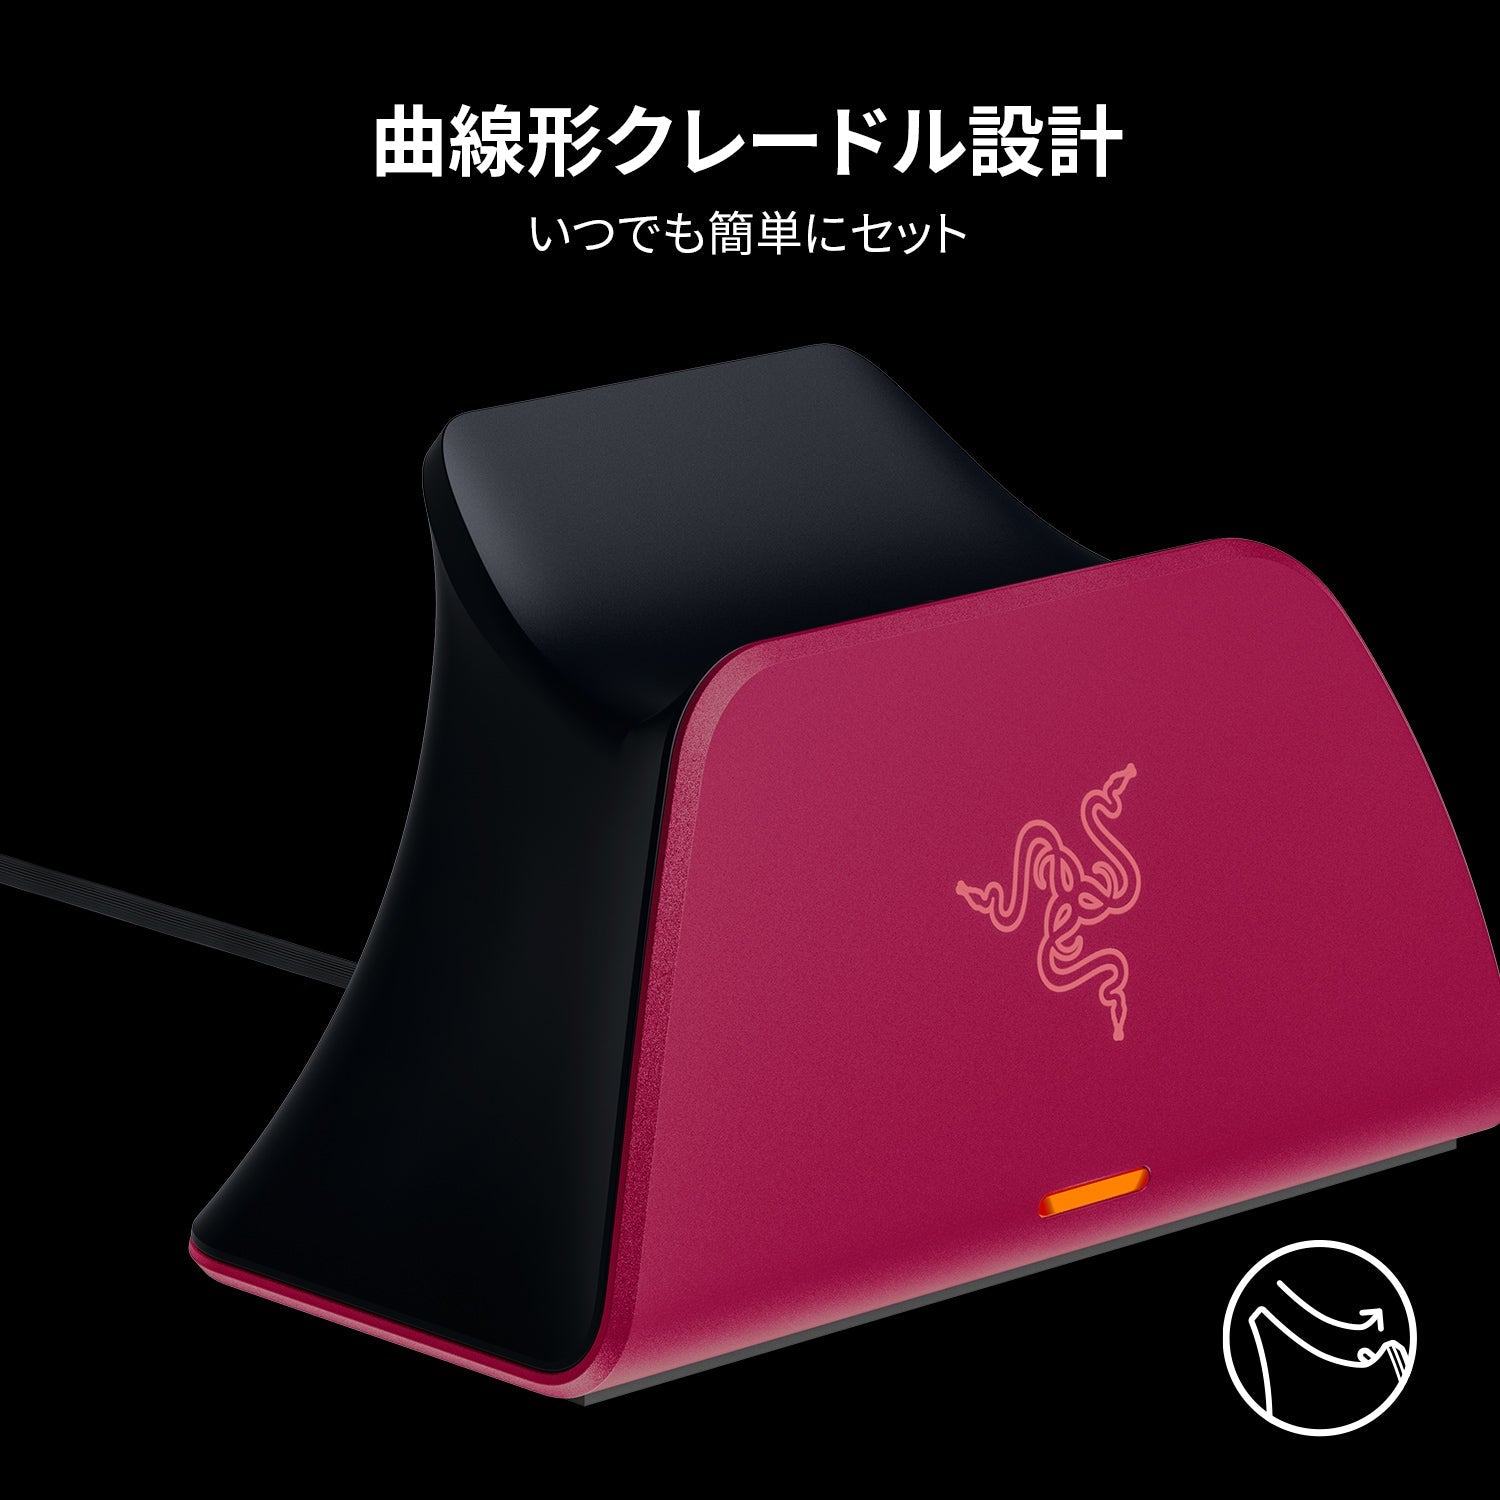 Razer Quick Charging Stand for PS5 (White) クイック チャージング スタンド ピーエスファイブ ホワイト thumbnail 3